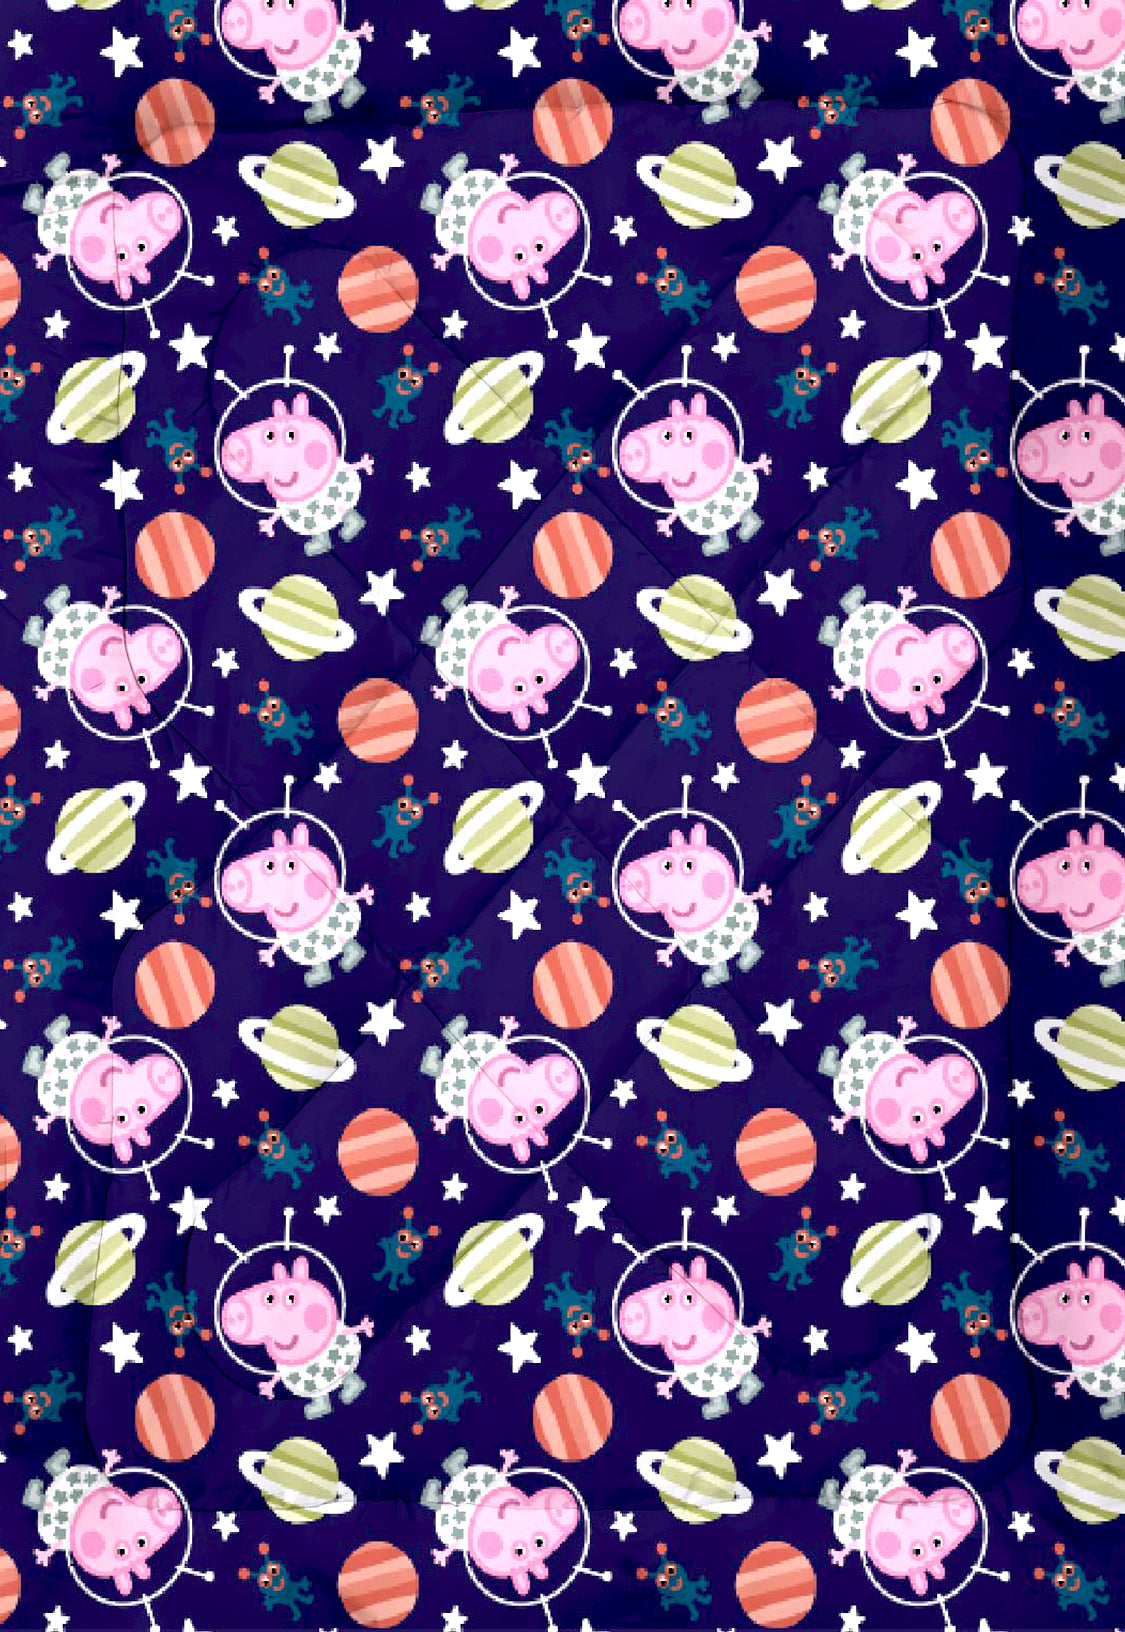 Peppa Outer Space Comforter